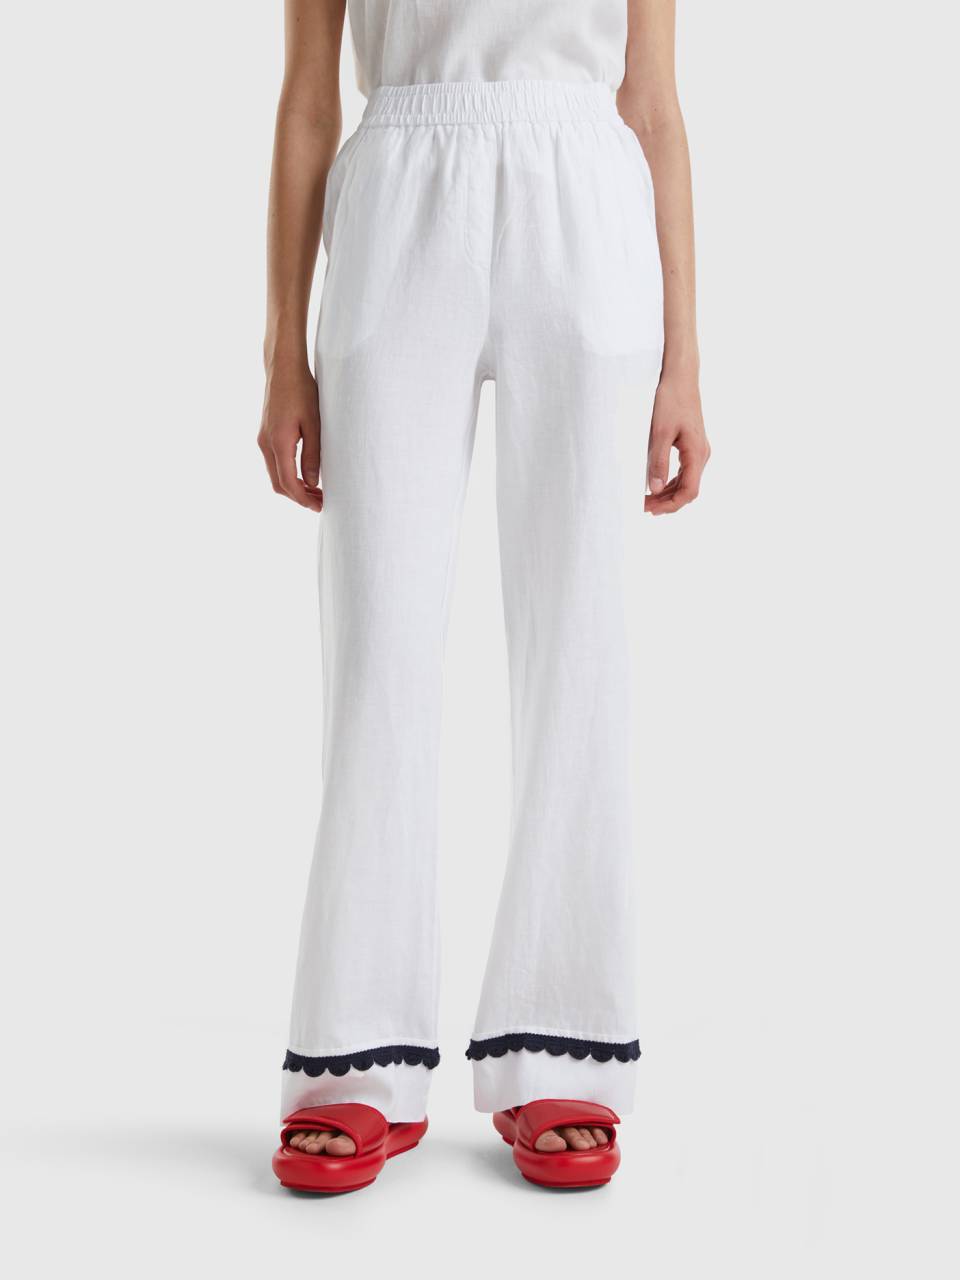 Benetton trousers in pure linen with crochet details. 1